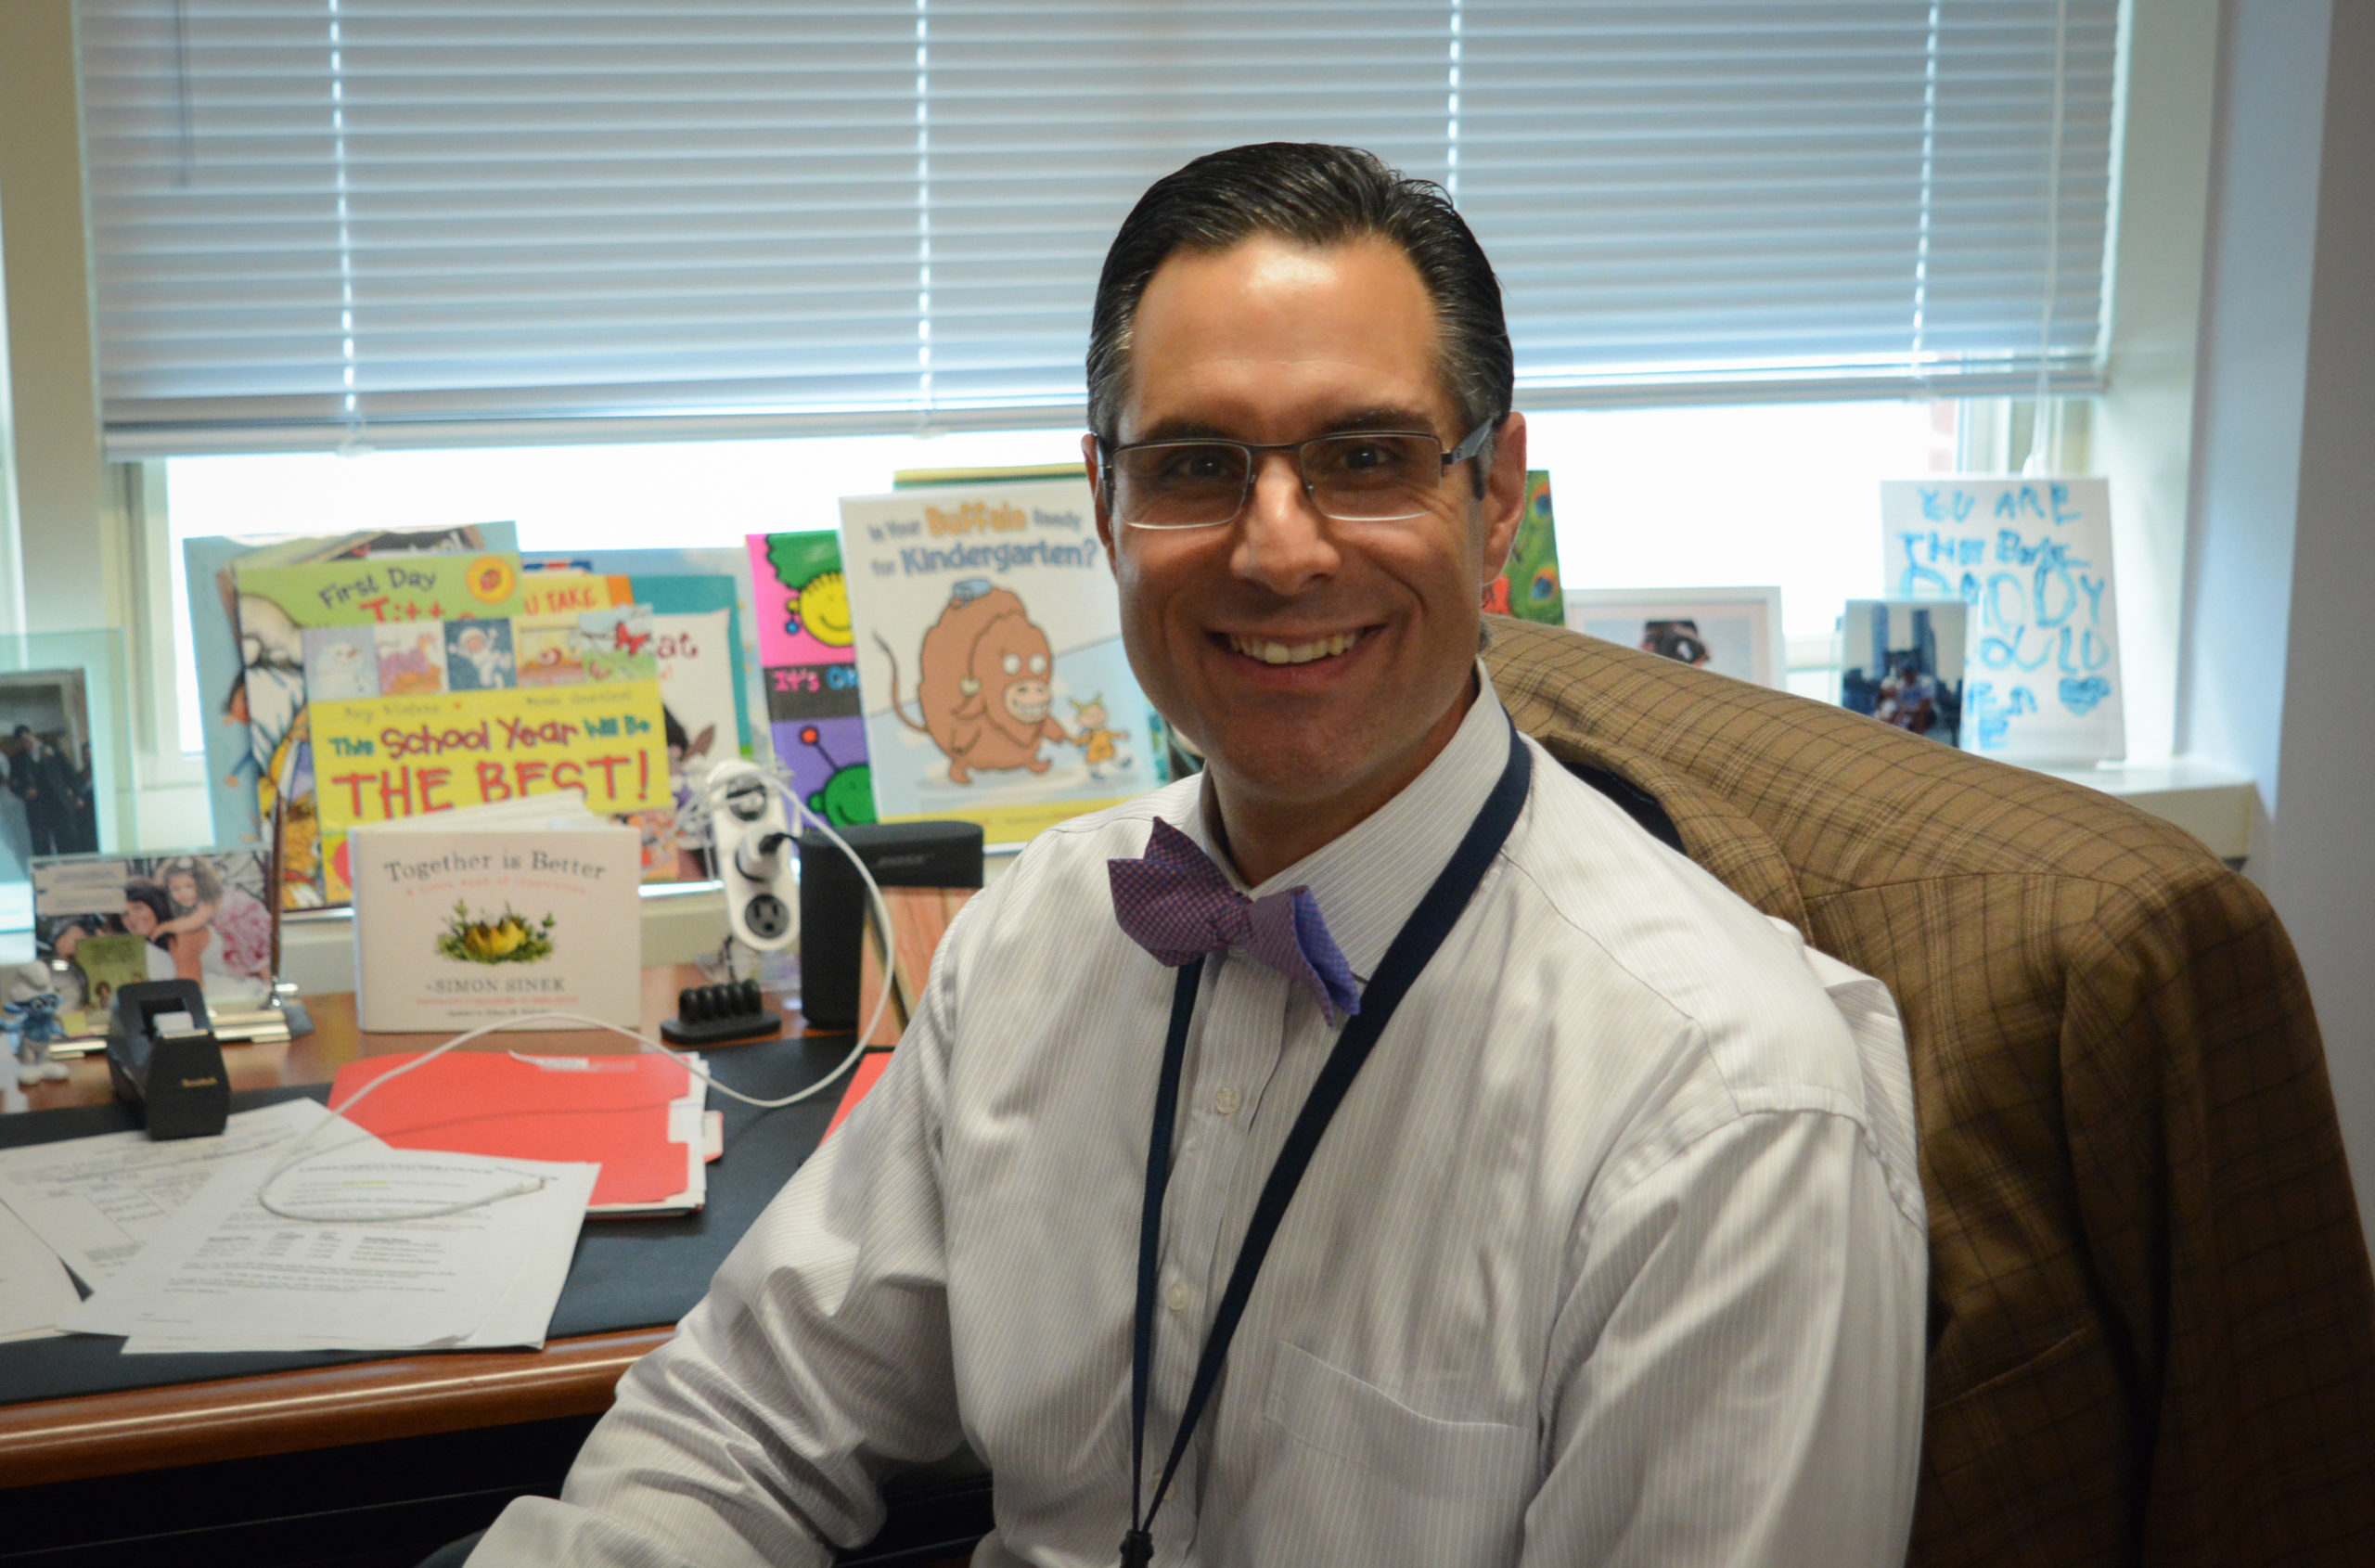 Michael Grimaldi is the new principal of E.M. Baker Elementary School. (Photo by Janelle Clausen)